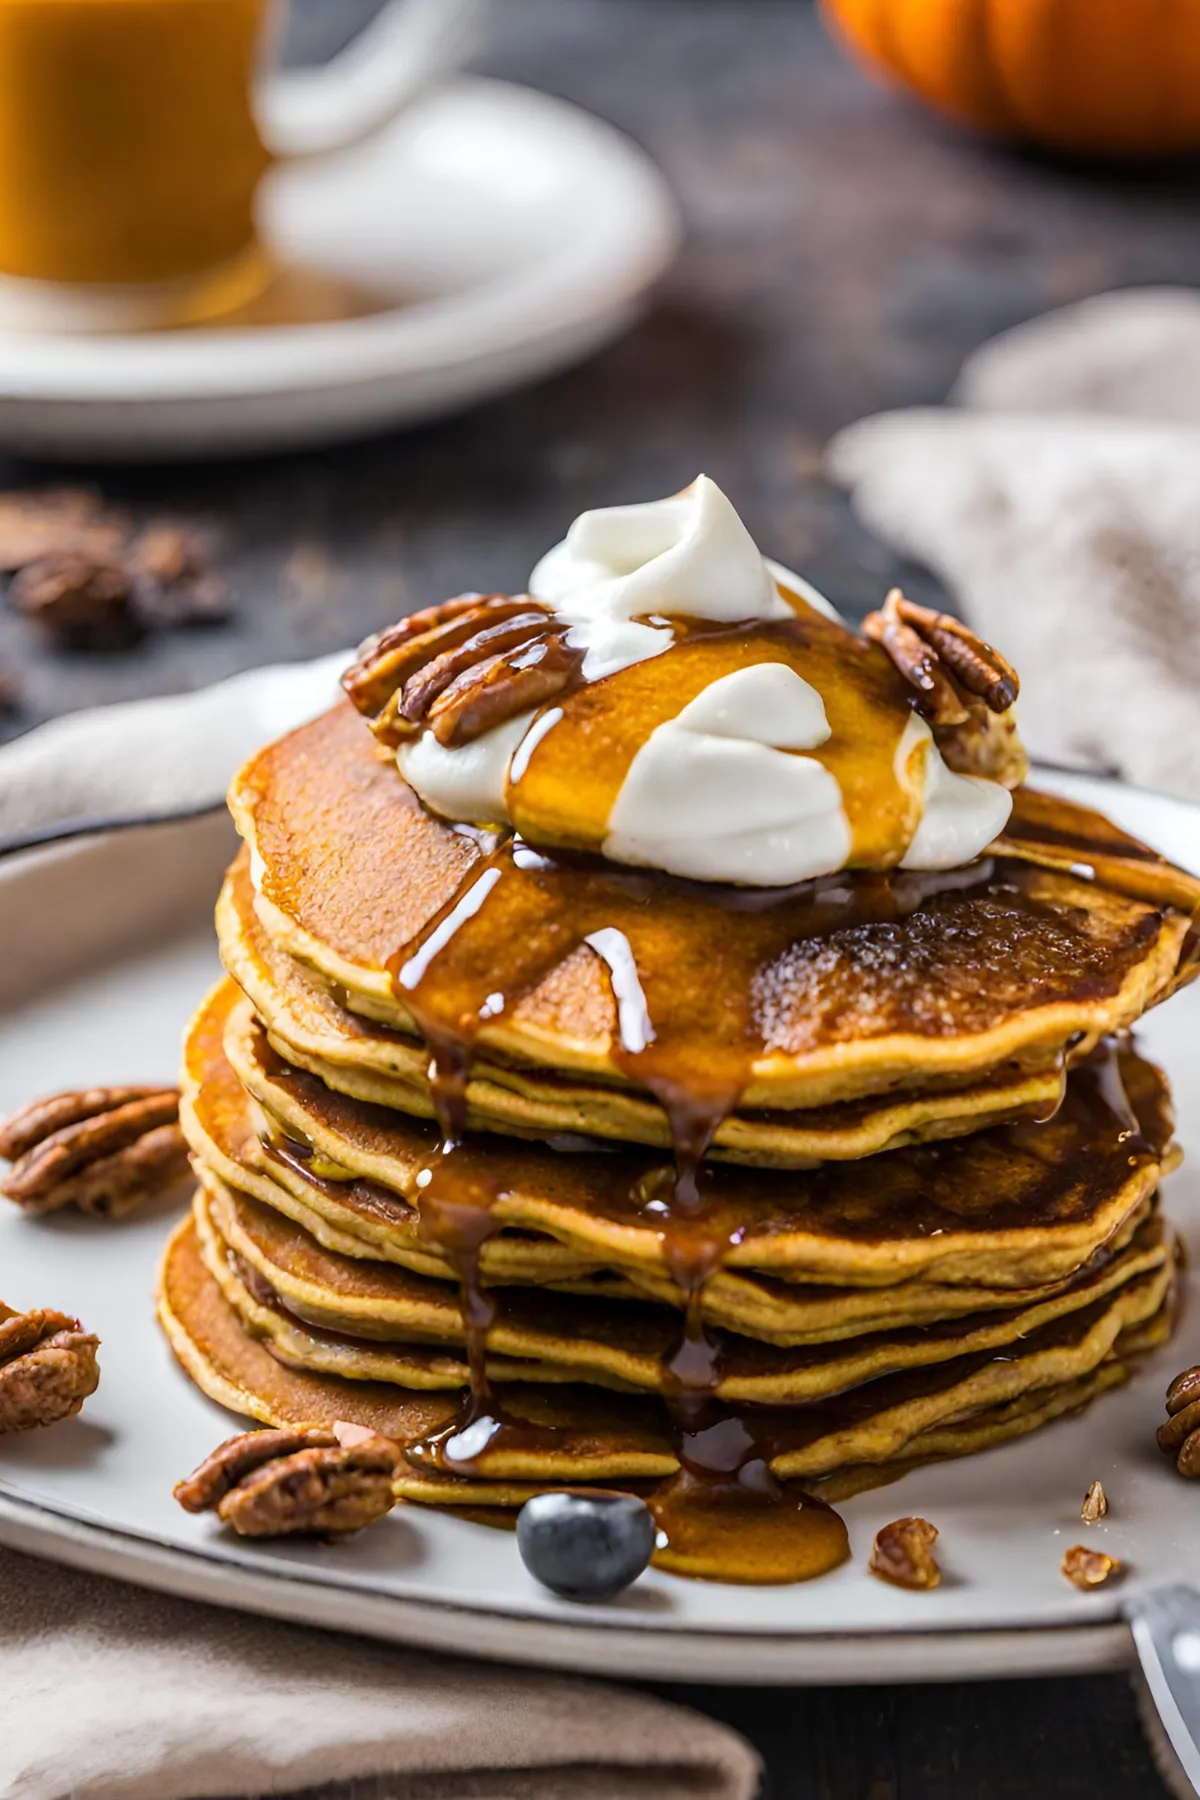 The Recipe and Cooking Tips for Keto Pumpkin Pancakes